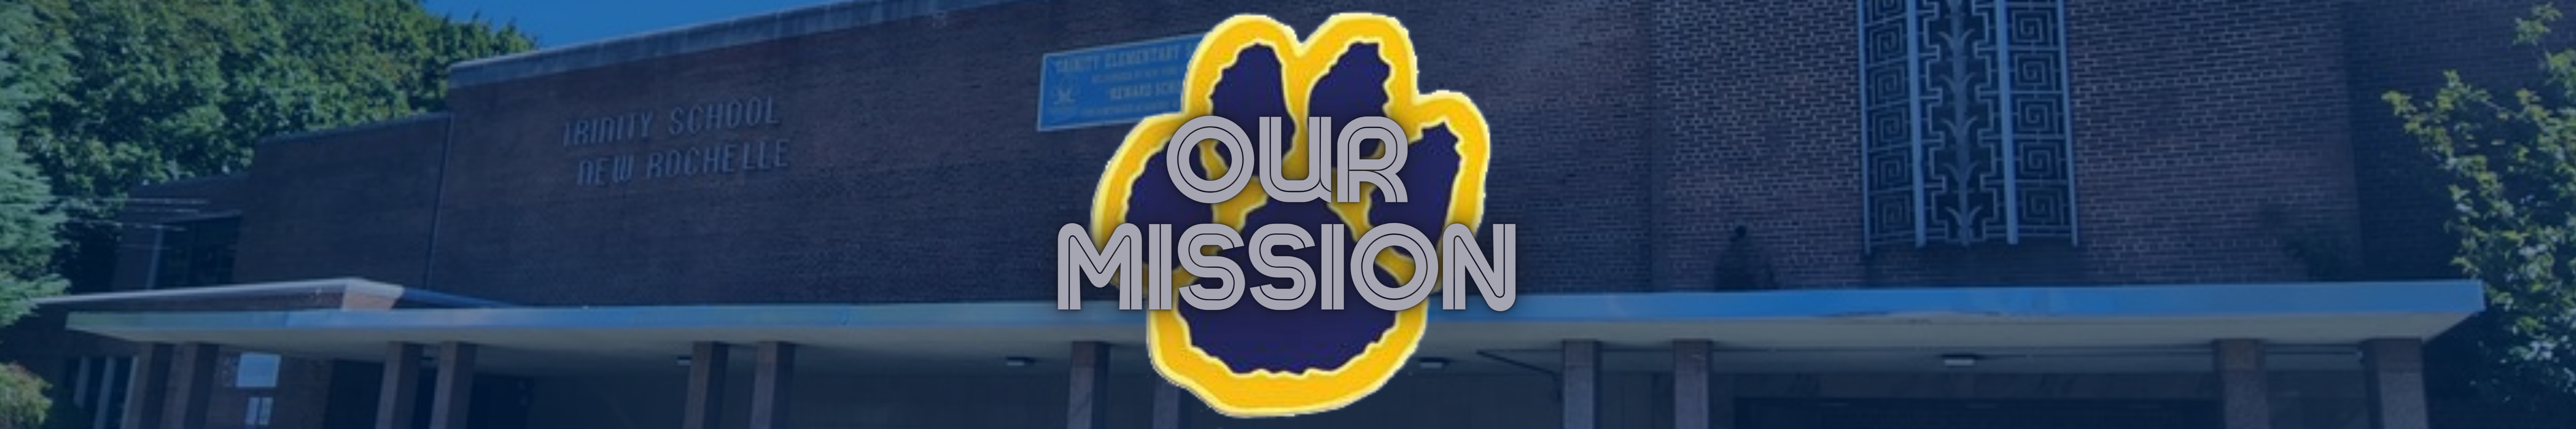 OUR MISSION banner